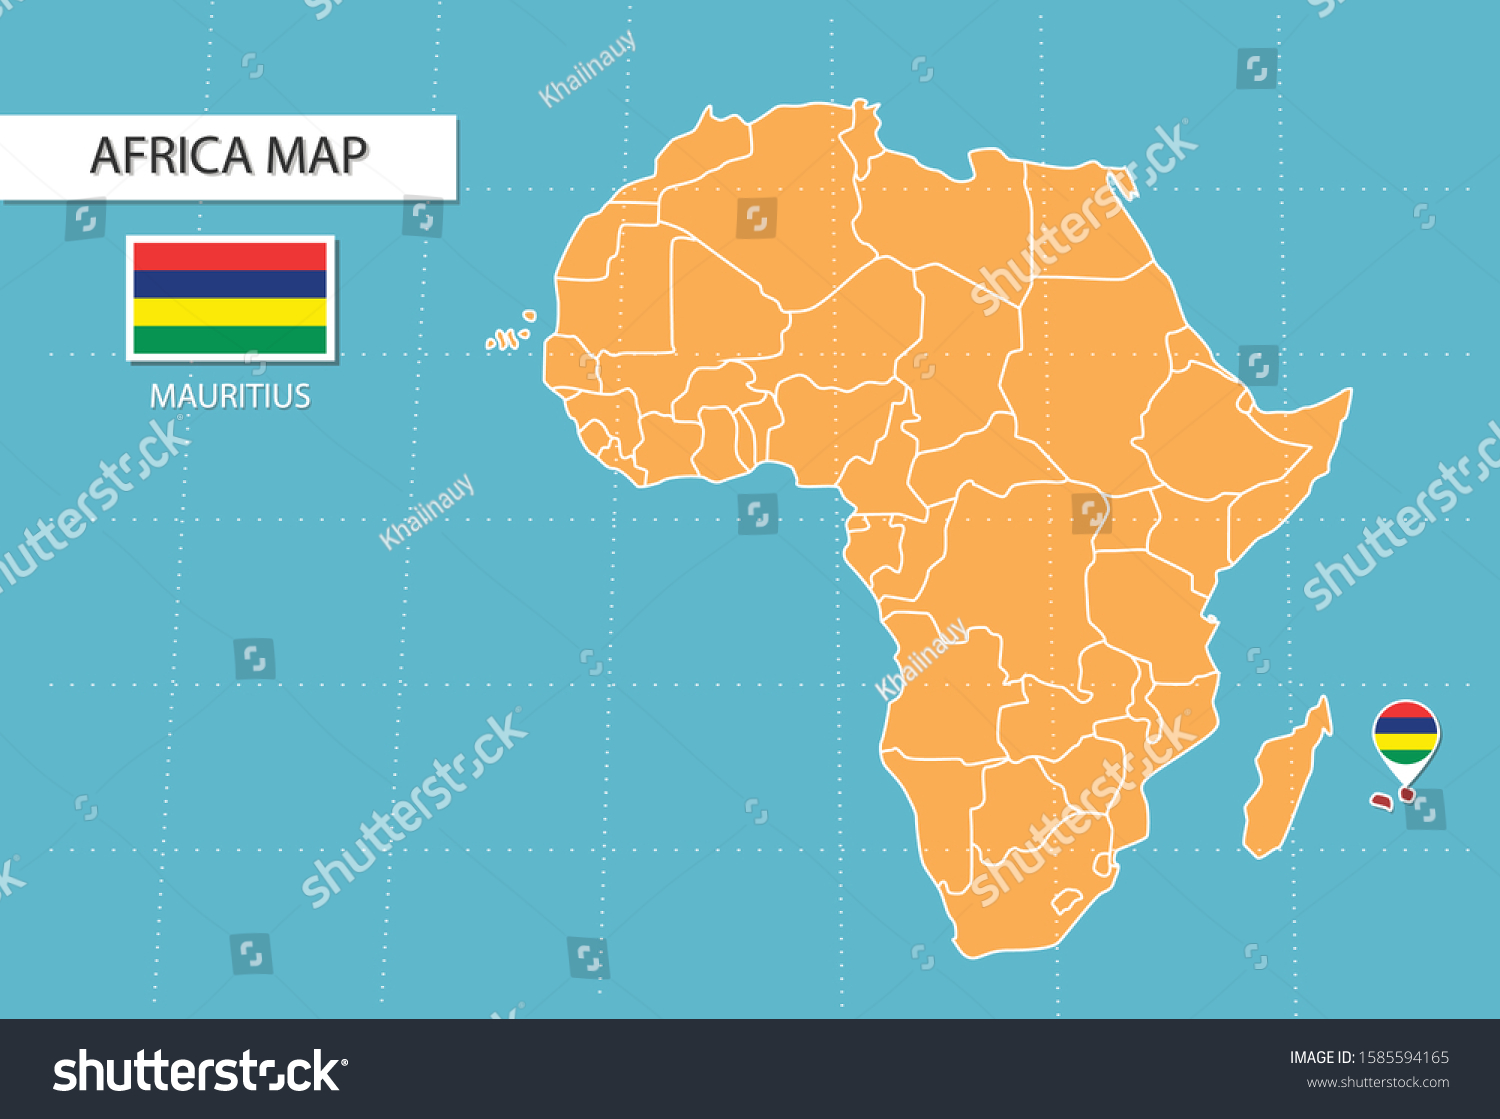 Mauritius Map Africa Icons Showing Mauritius Stock Vector Royalty